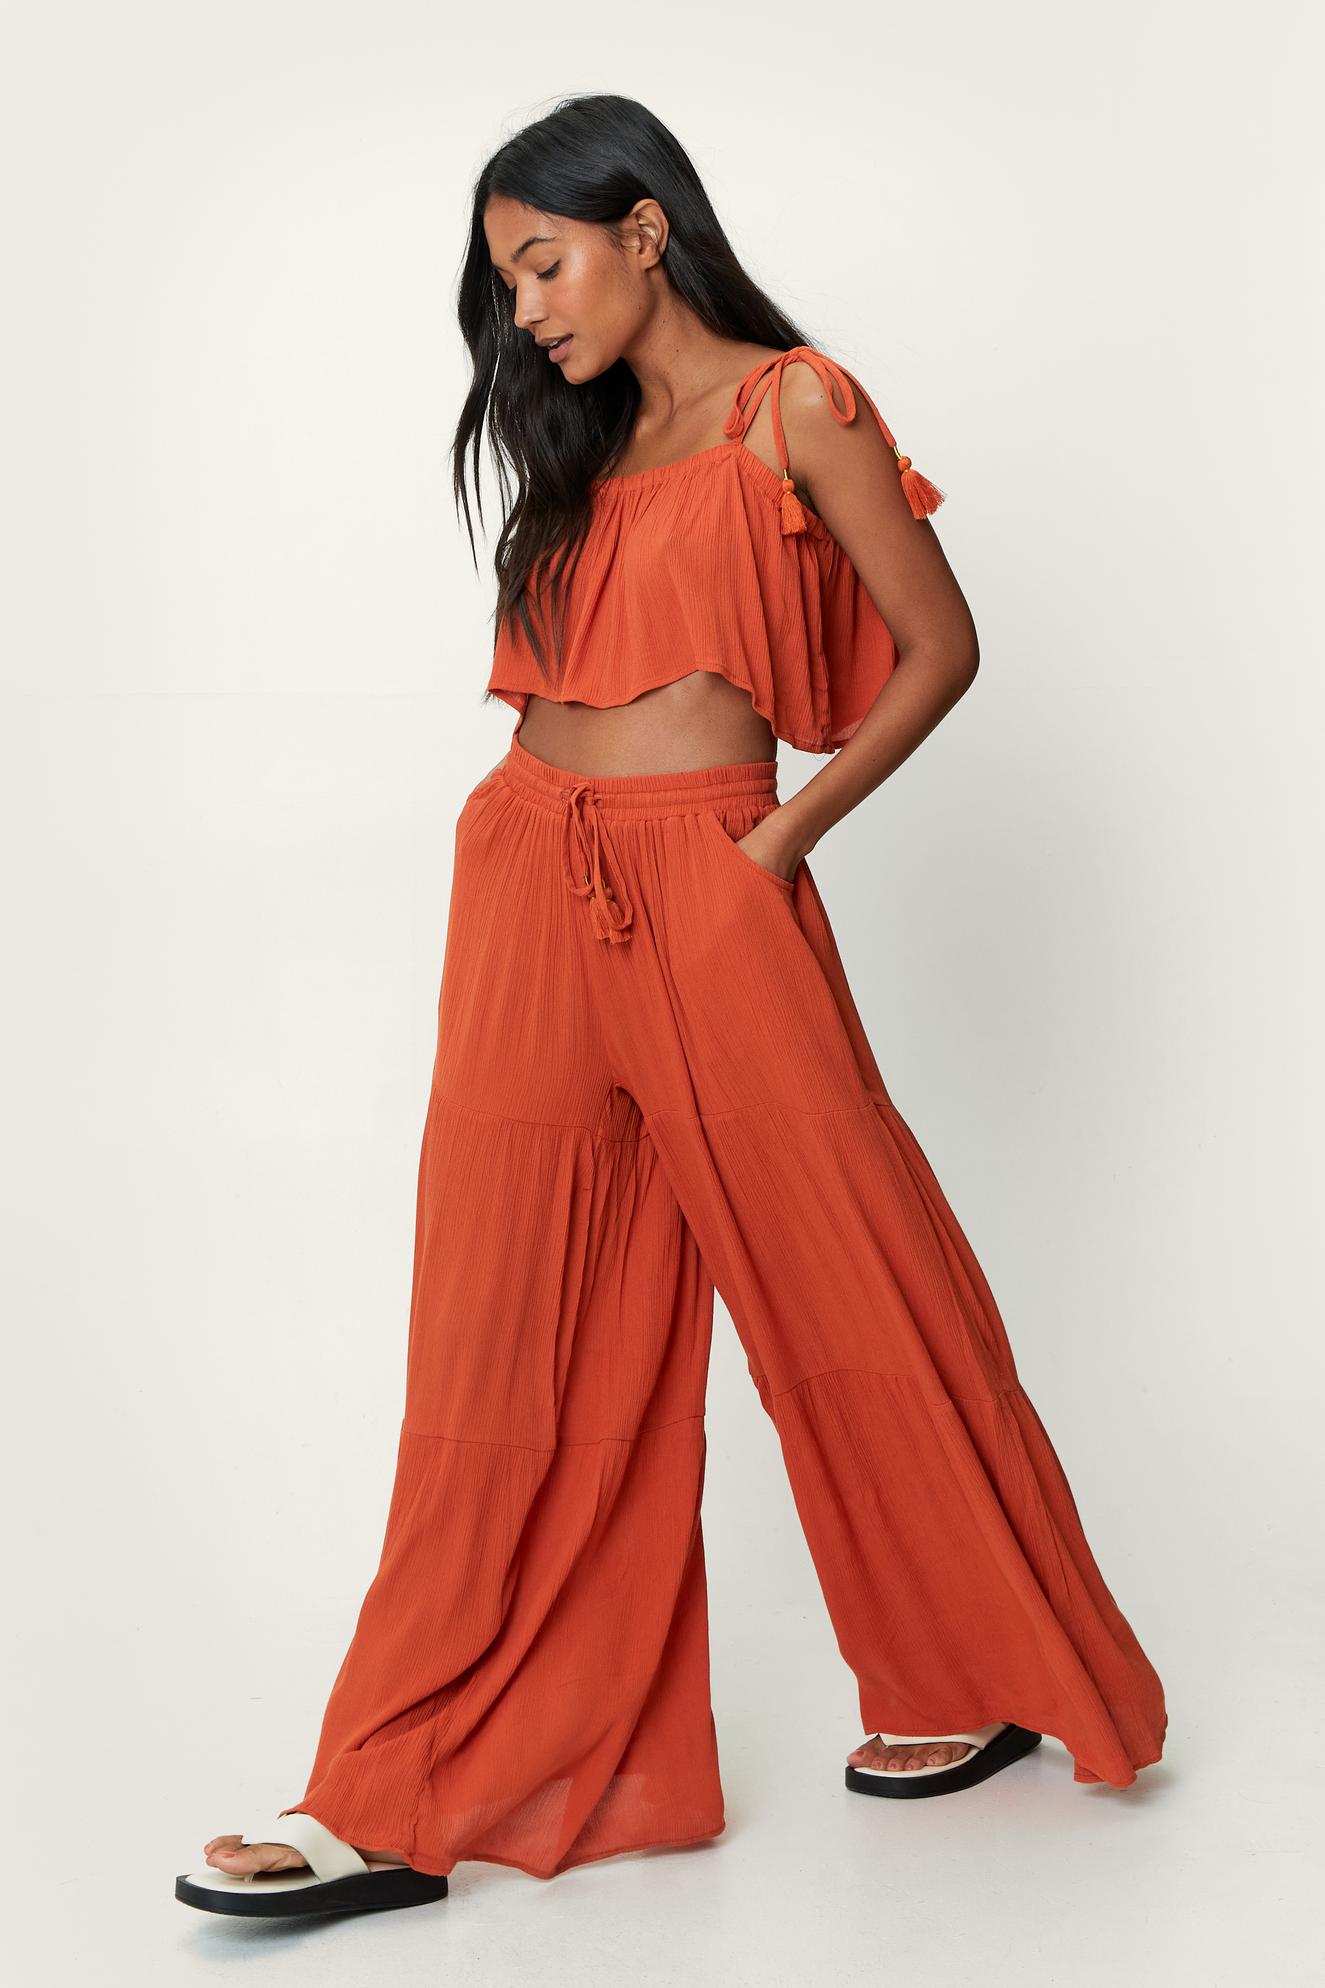 Cami Top and Wide Leg Beach Pants